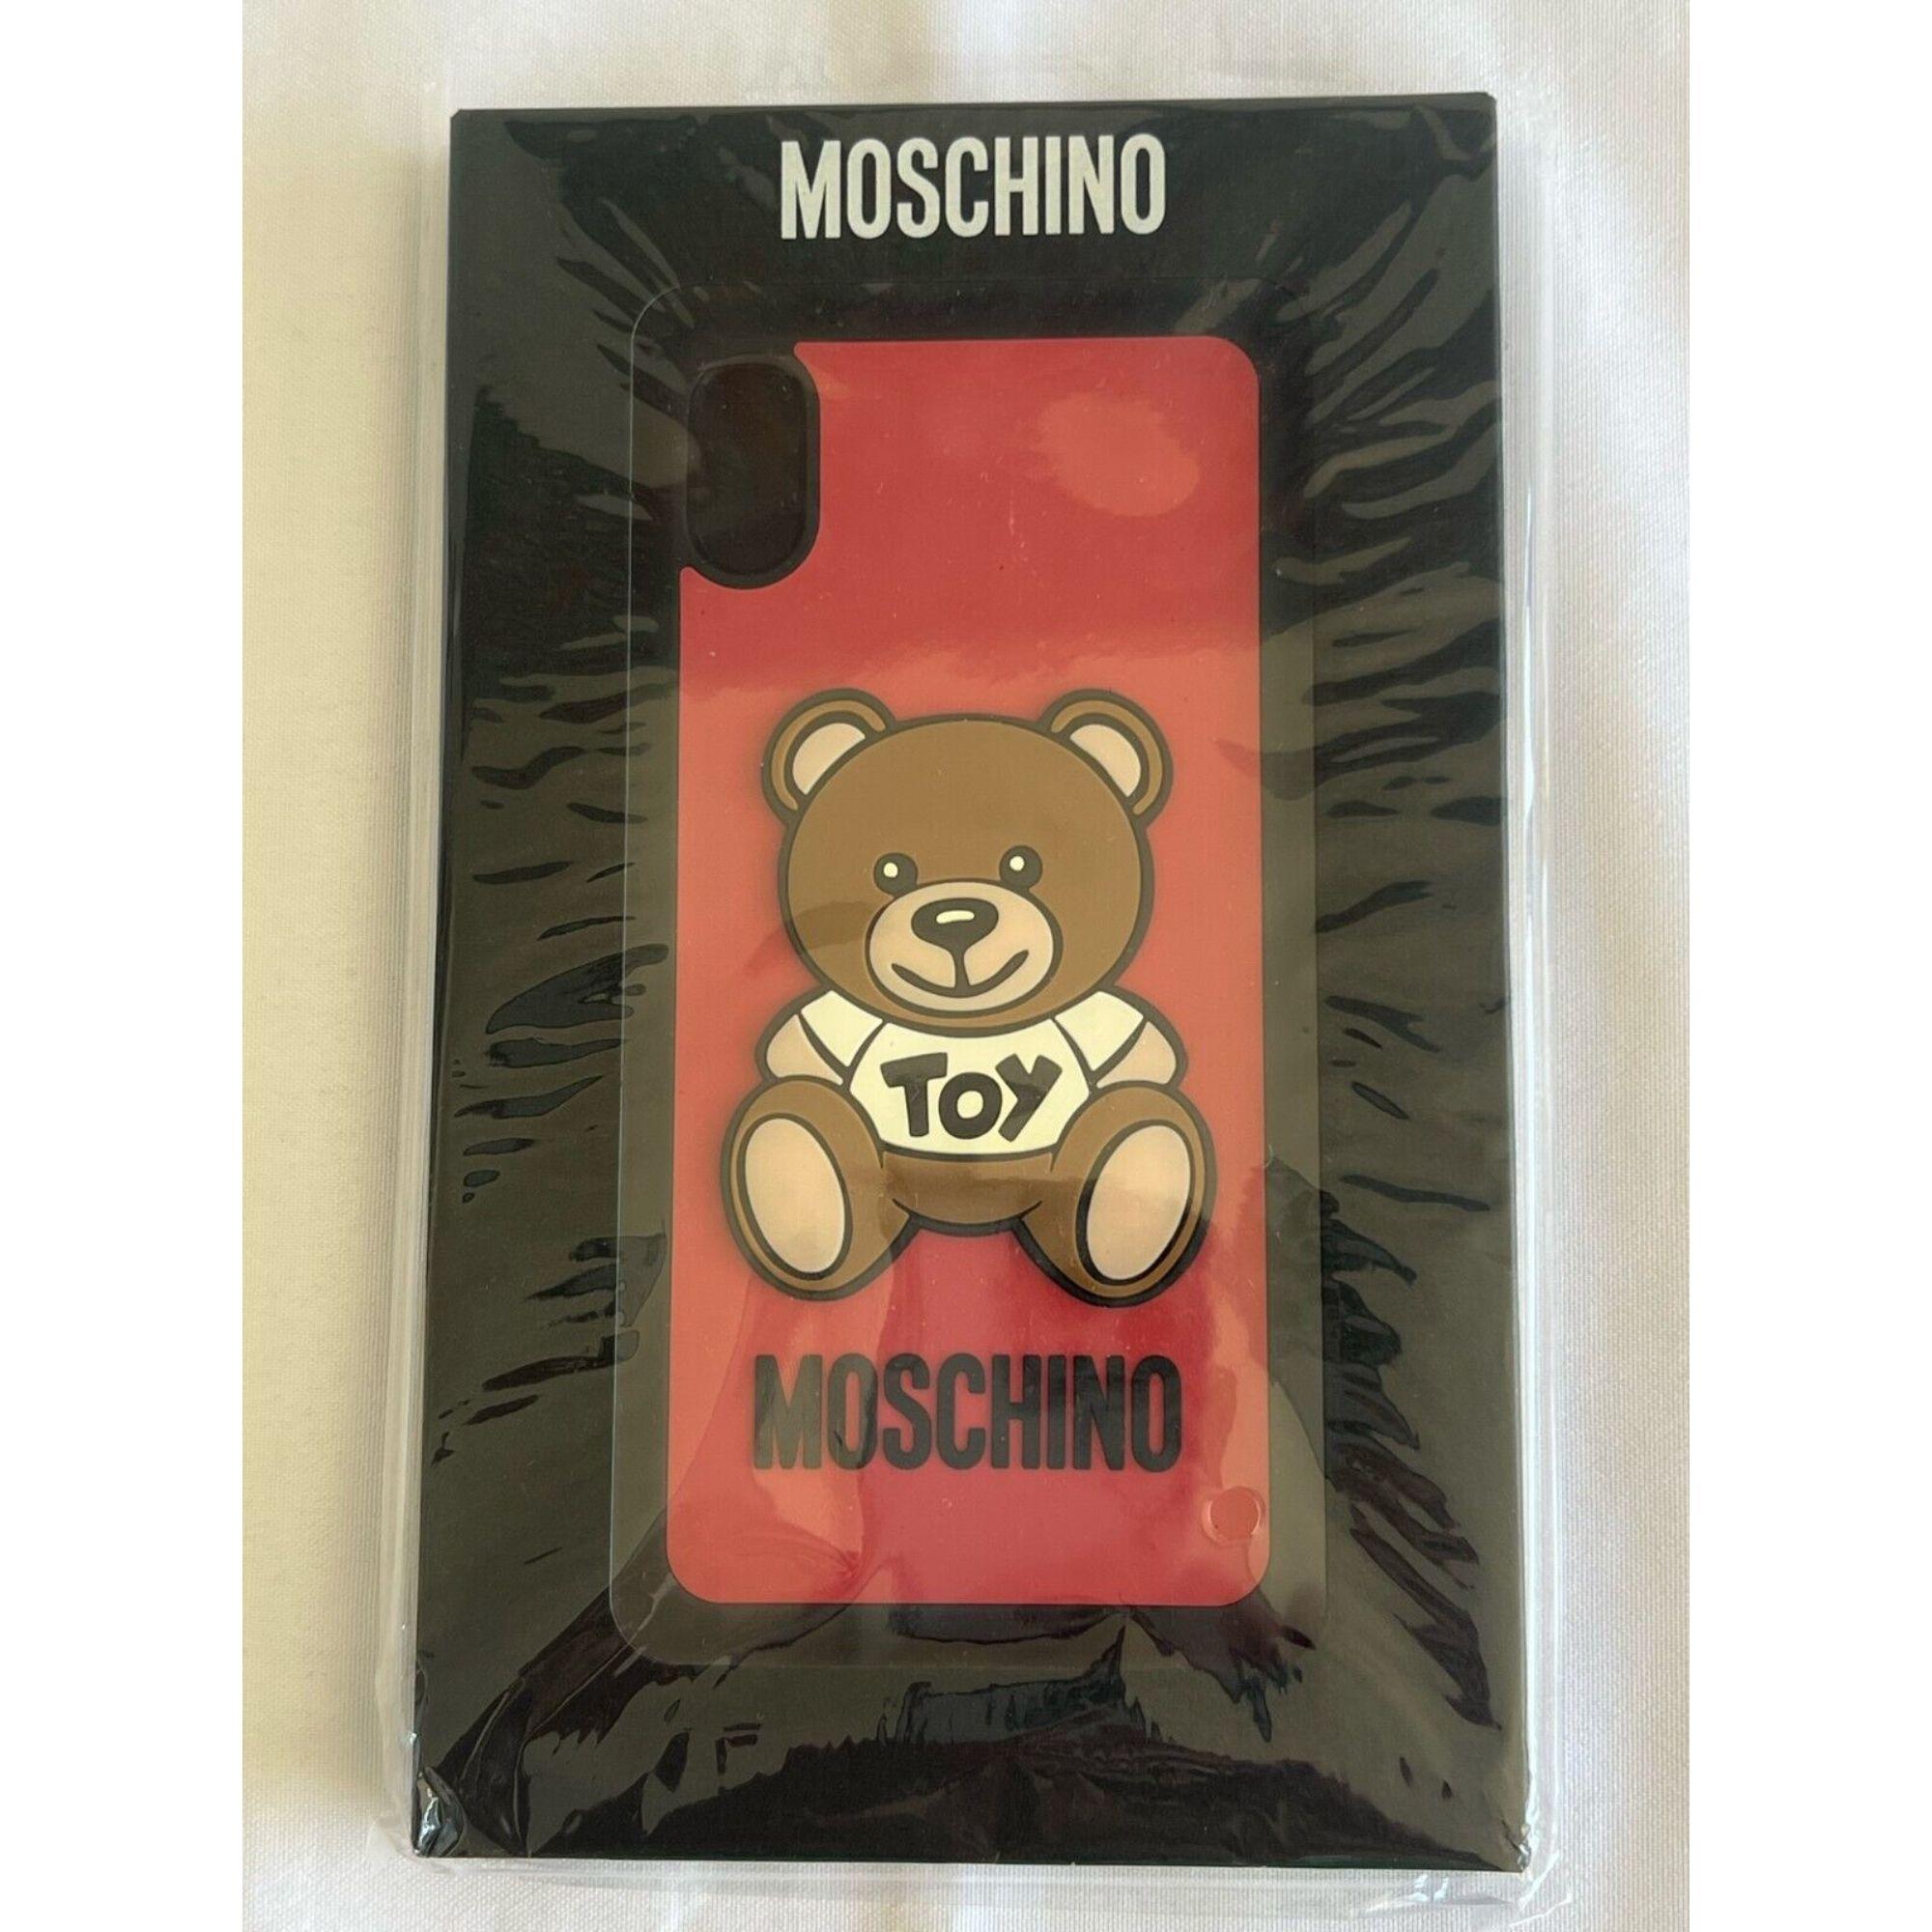 Black SS21 Moschino Couture Red iPhone XS Max Case with Teddy Bear Toy by Jeremy Scott For Sale